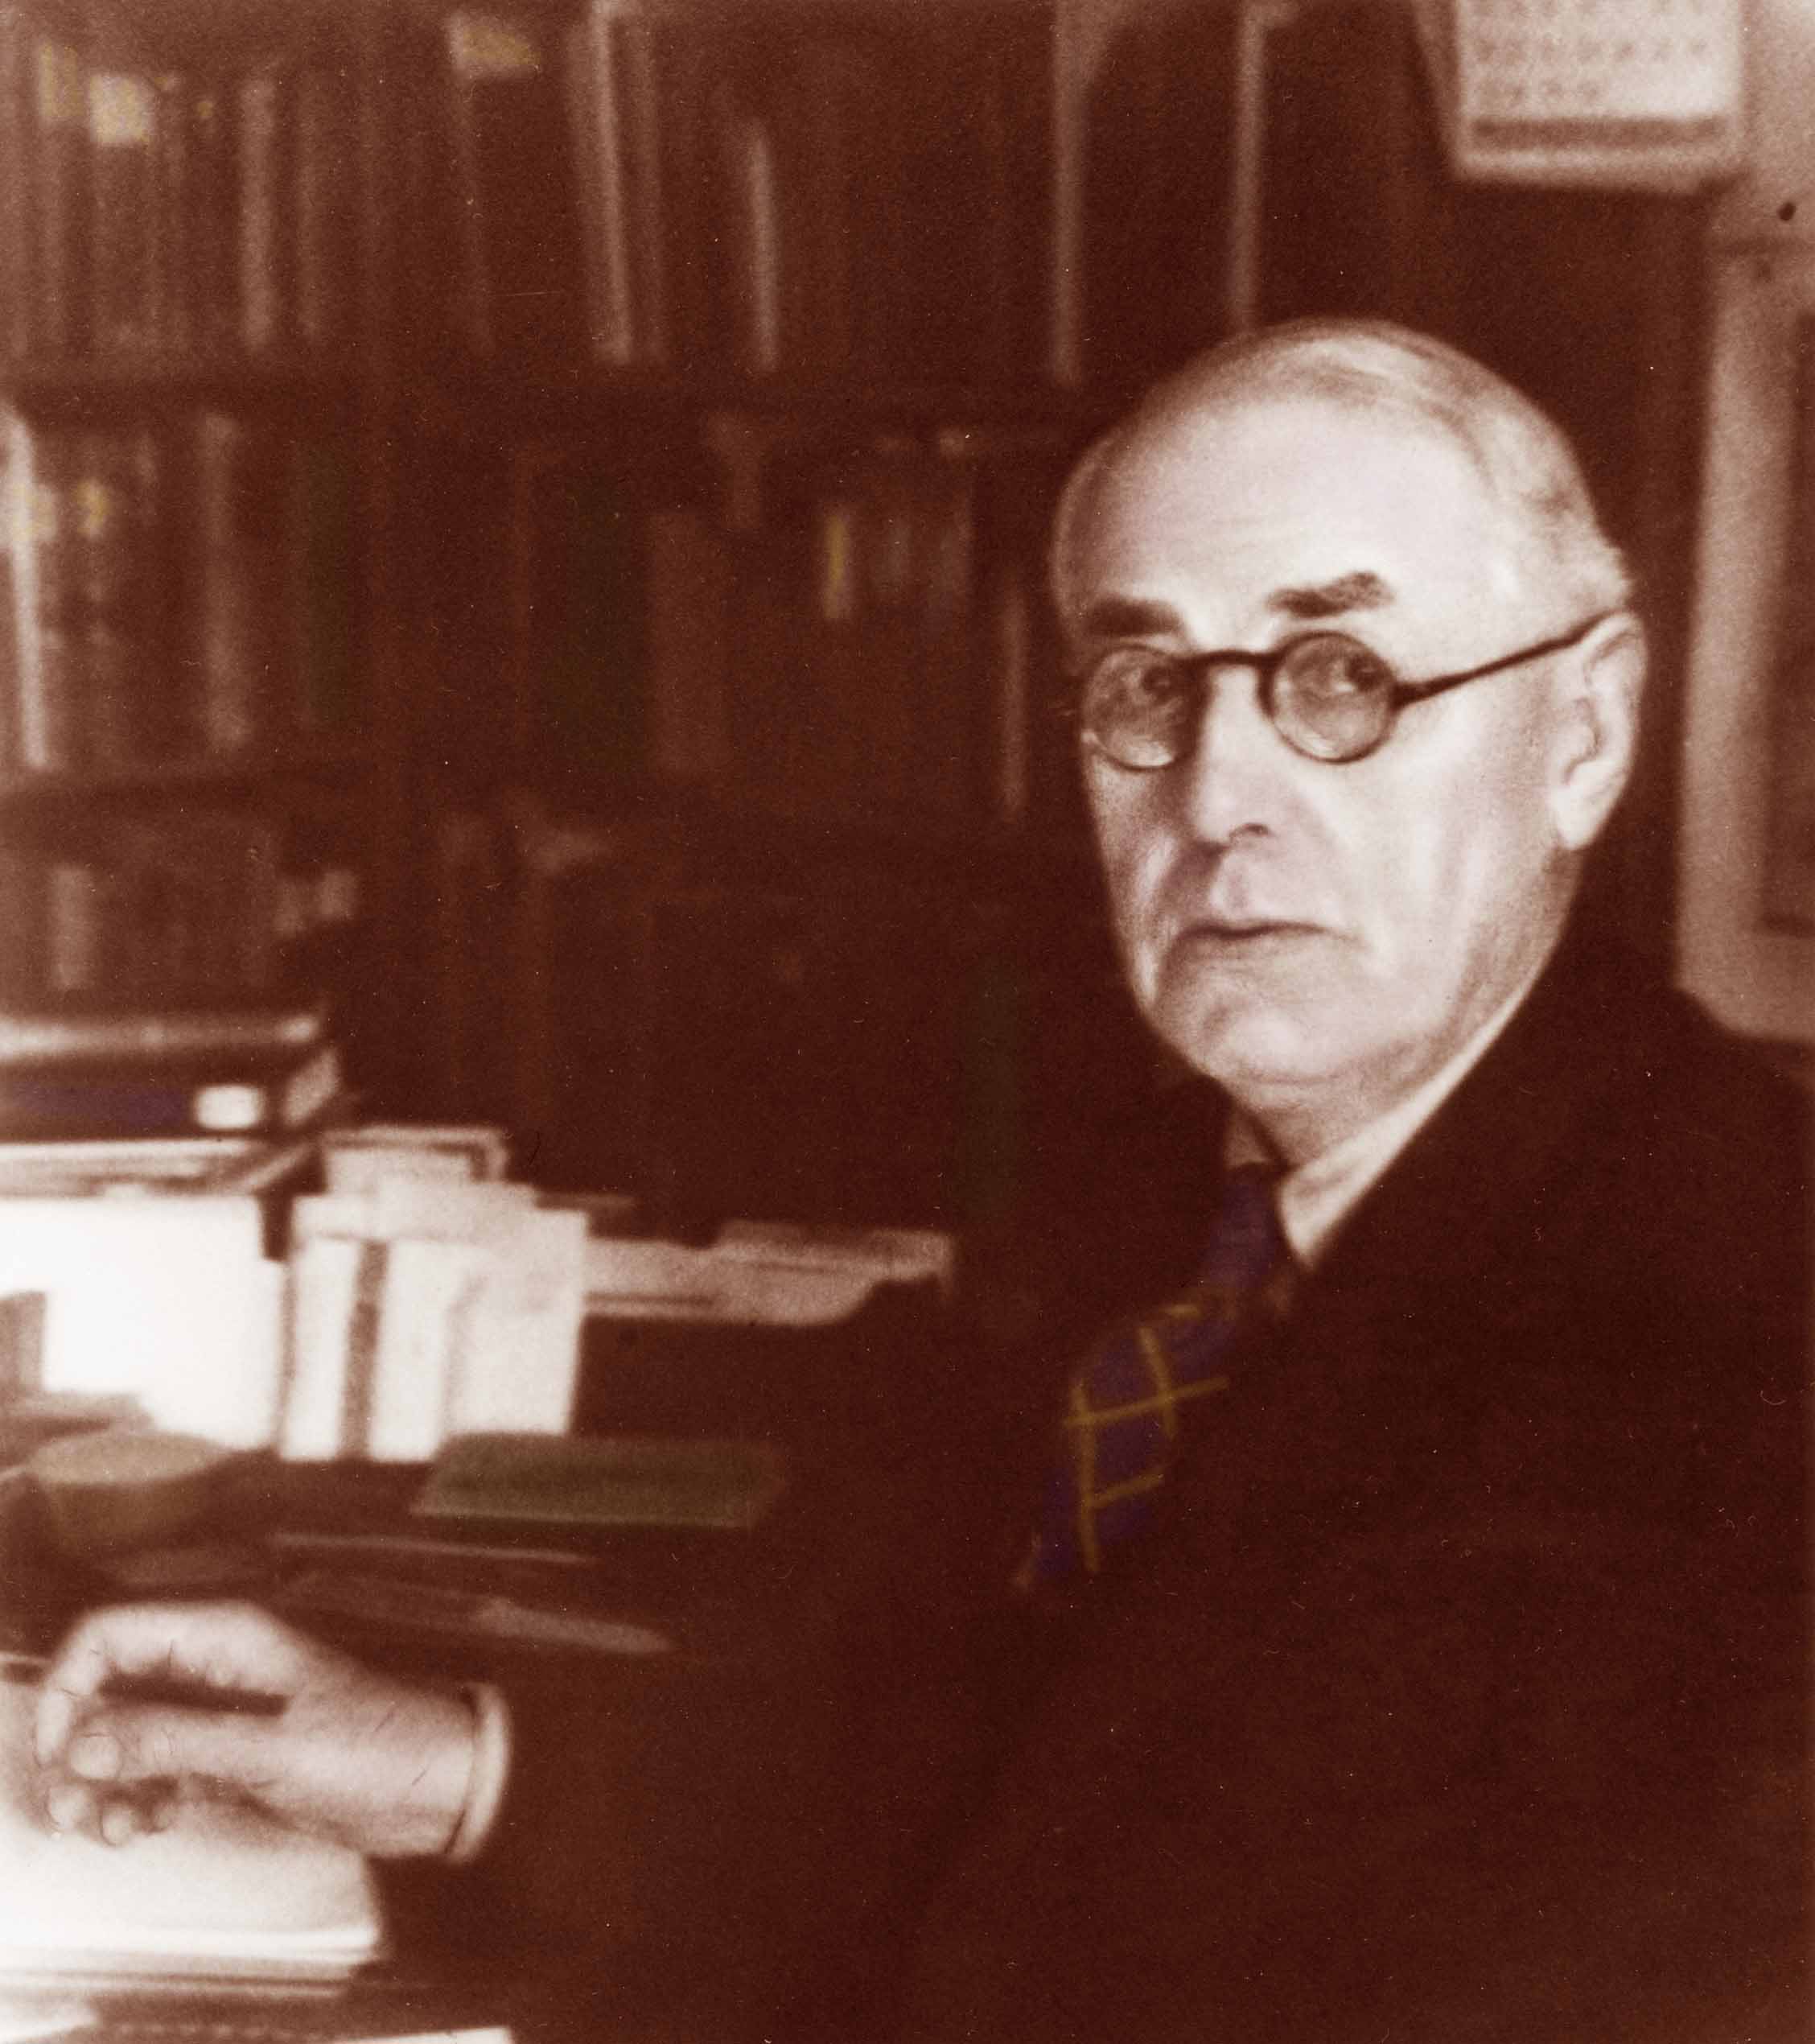 Frederick J. Teggart (1870-1946) founded the Department of Social Institutions, later called Sociology, at University of California, Berkeley.